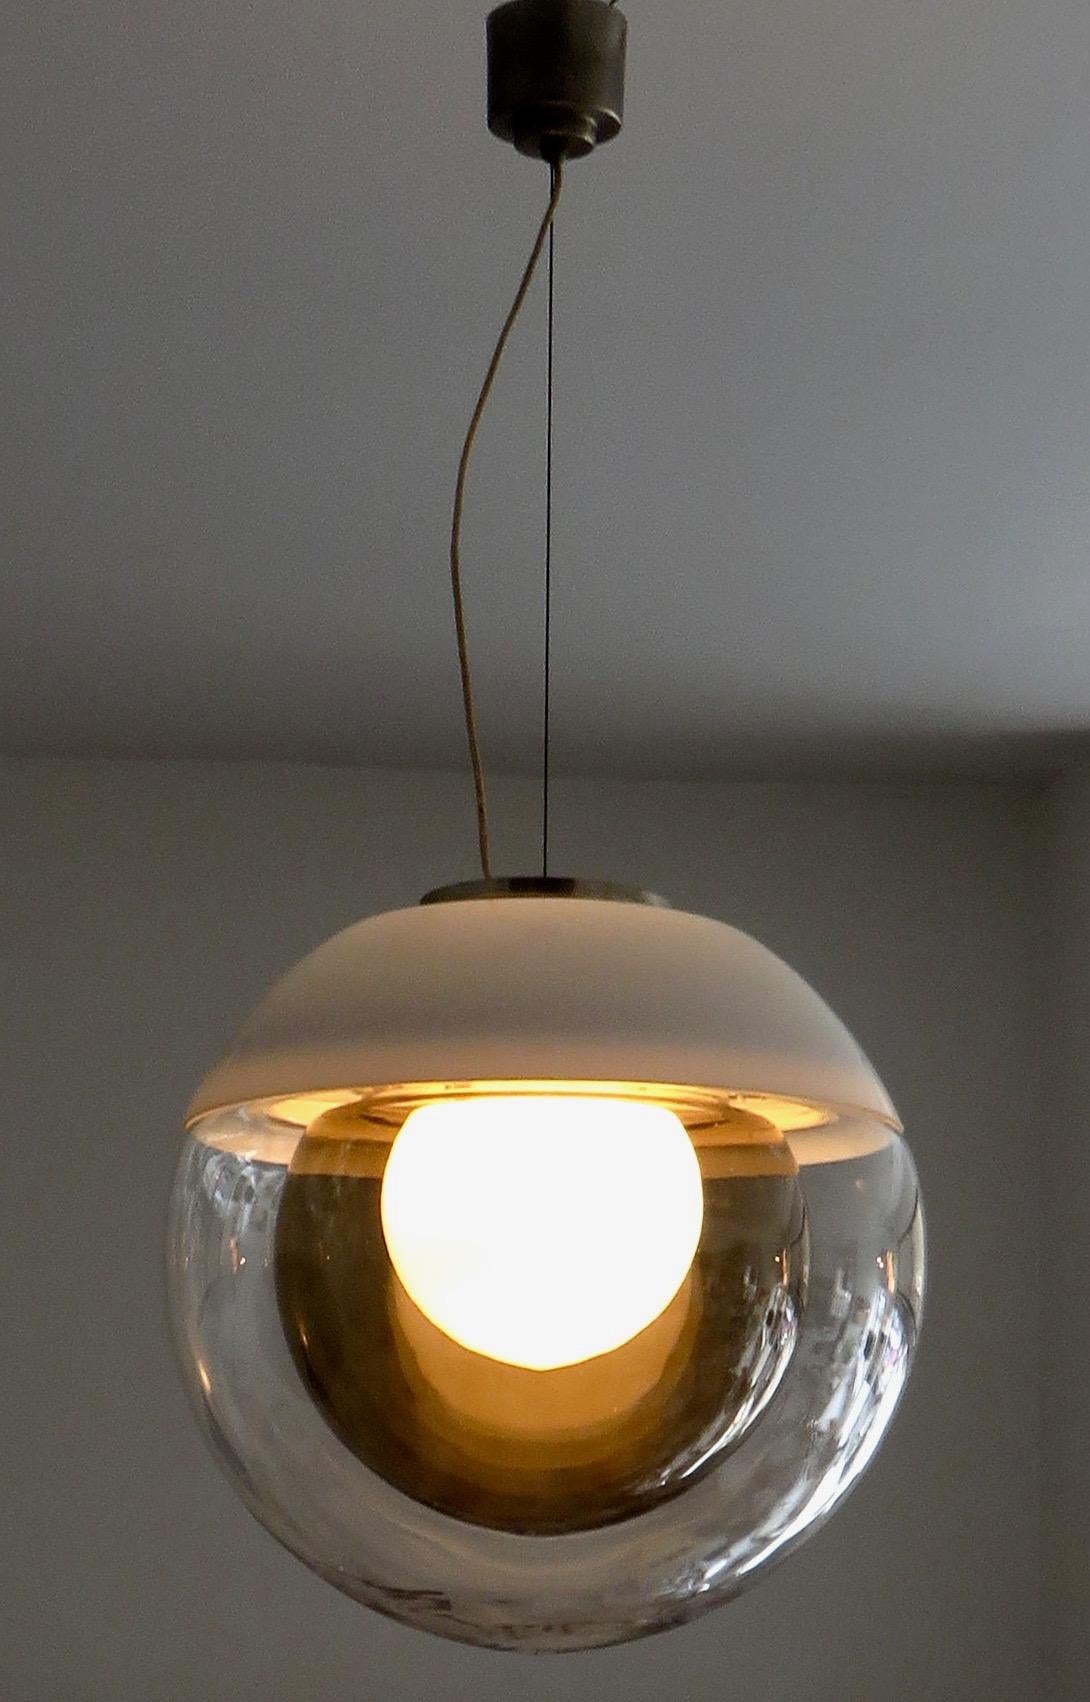 Italian multi globe glass pendant chandelier light.
The fixture is made up of three concentric glass globes.
First a centre cased white glass core globe that holds the single light source.
Second, a dark amber/brown translucent globe.
Third, the